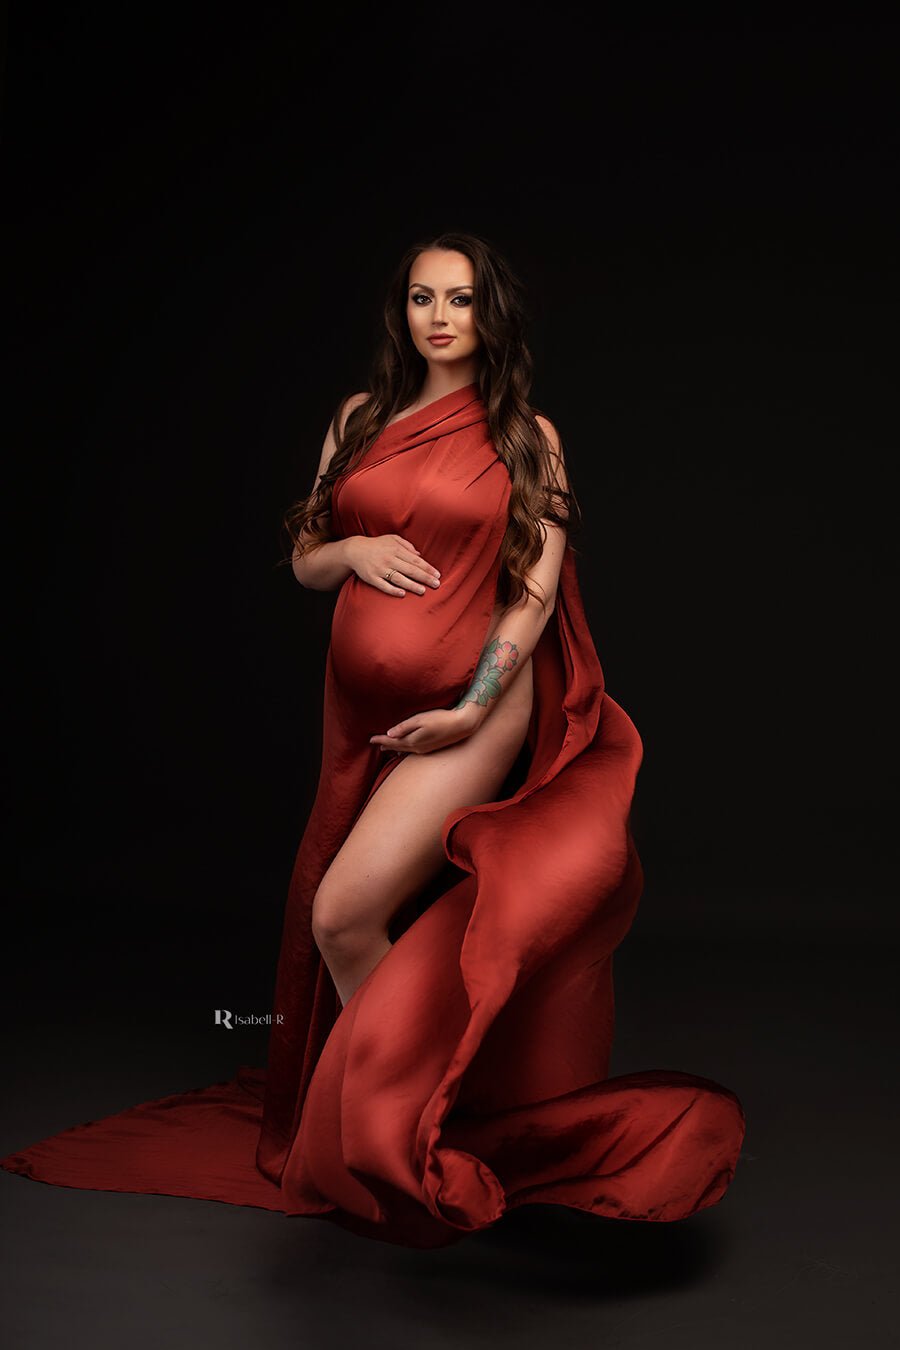 Brunette model poses in a studio during a maternity photoshoot. She wears only a scarf to cover her body. She holds her bump with both of her hands. The model faces the camera and the scarf is thrown just before the shot, the photo captures the moment that the rust orange scarf falls in a playful way.